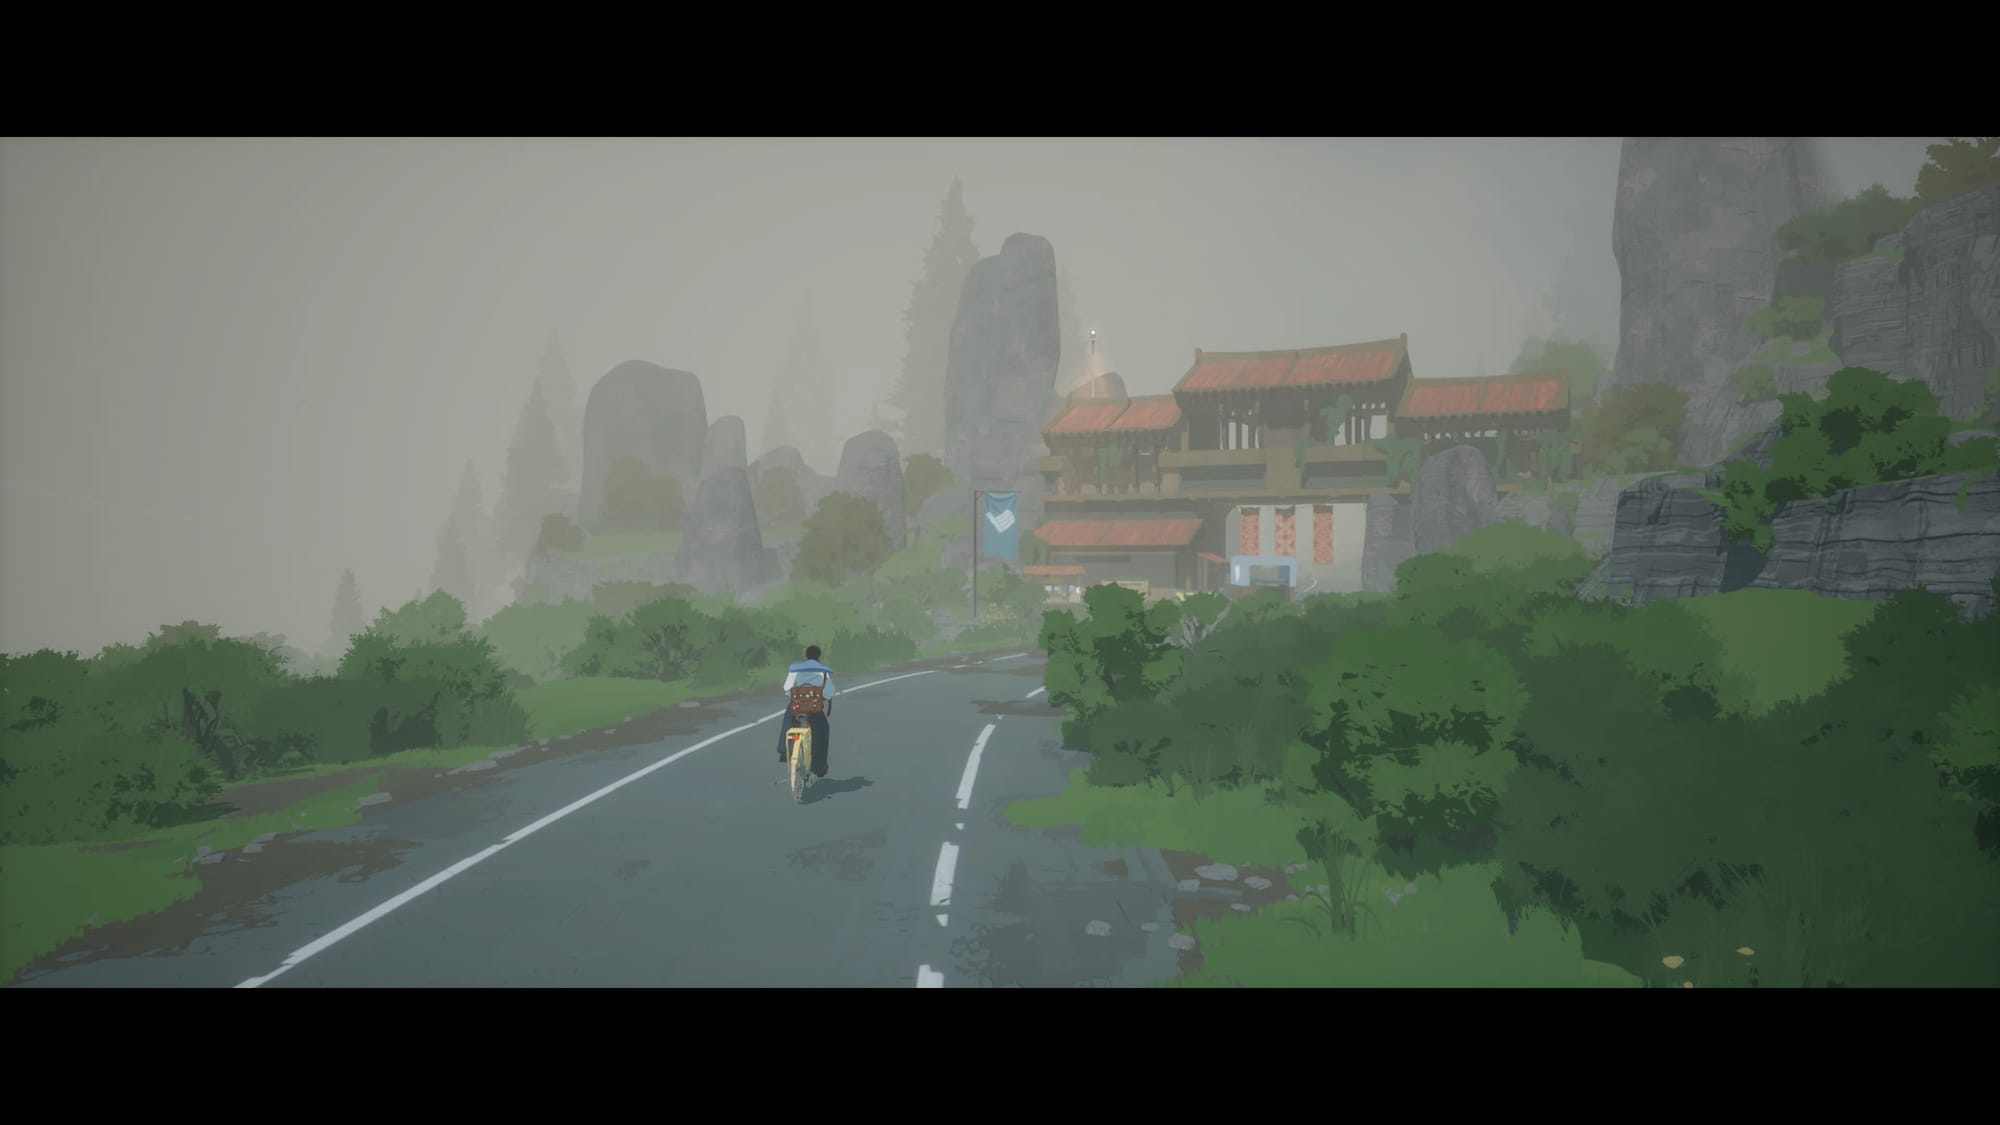 Main character rides on the bicycle through the fog by the road towards and asiam style gates surrounded by rocks and greens